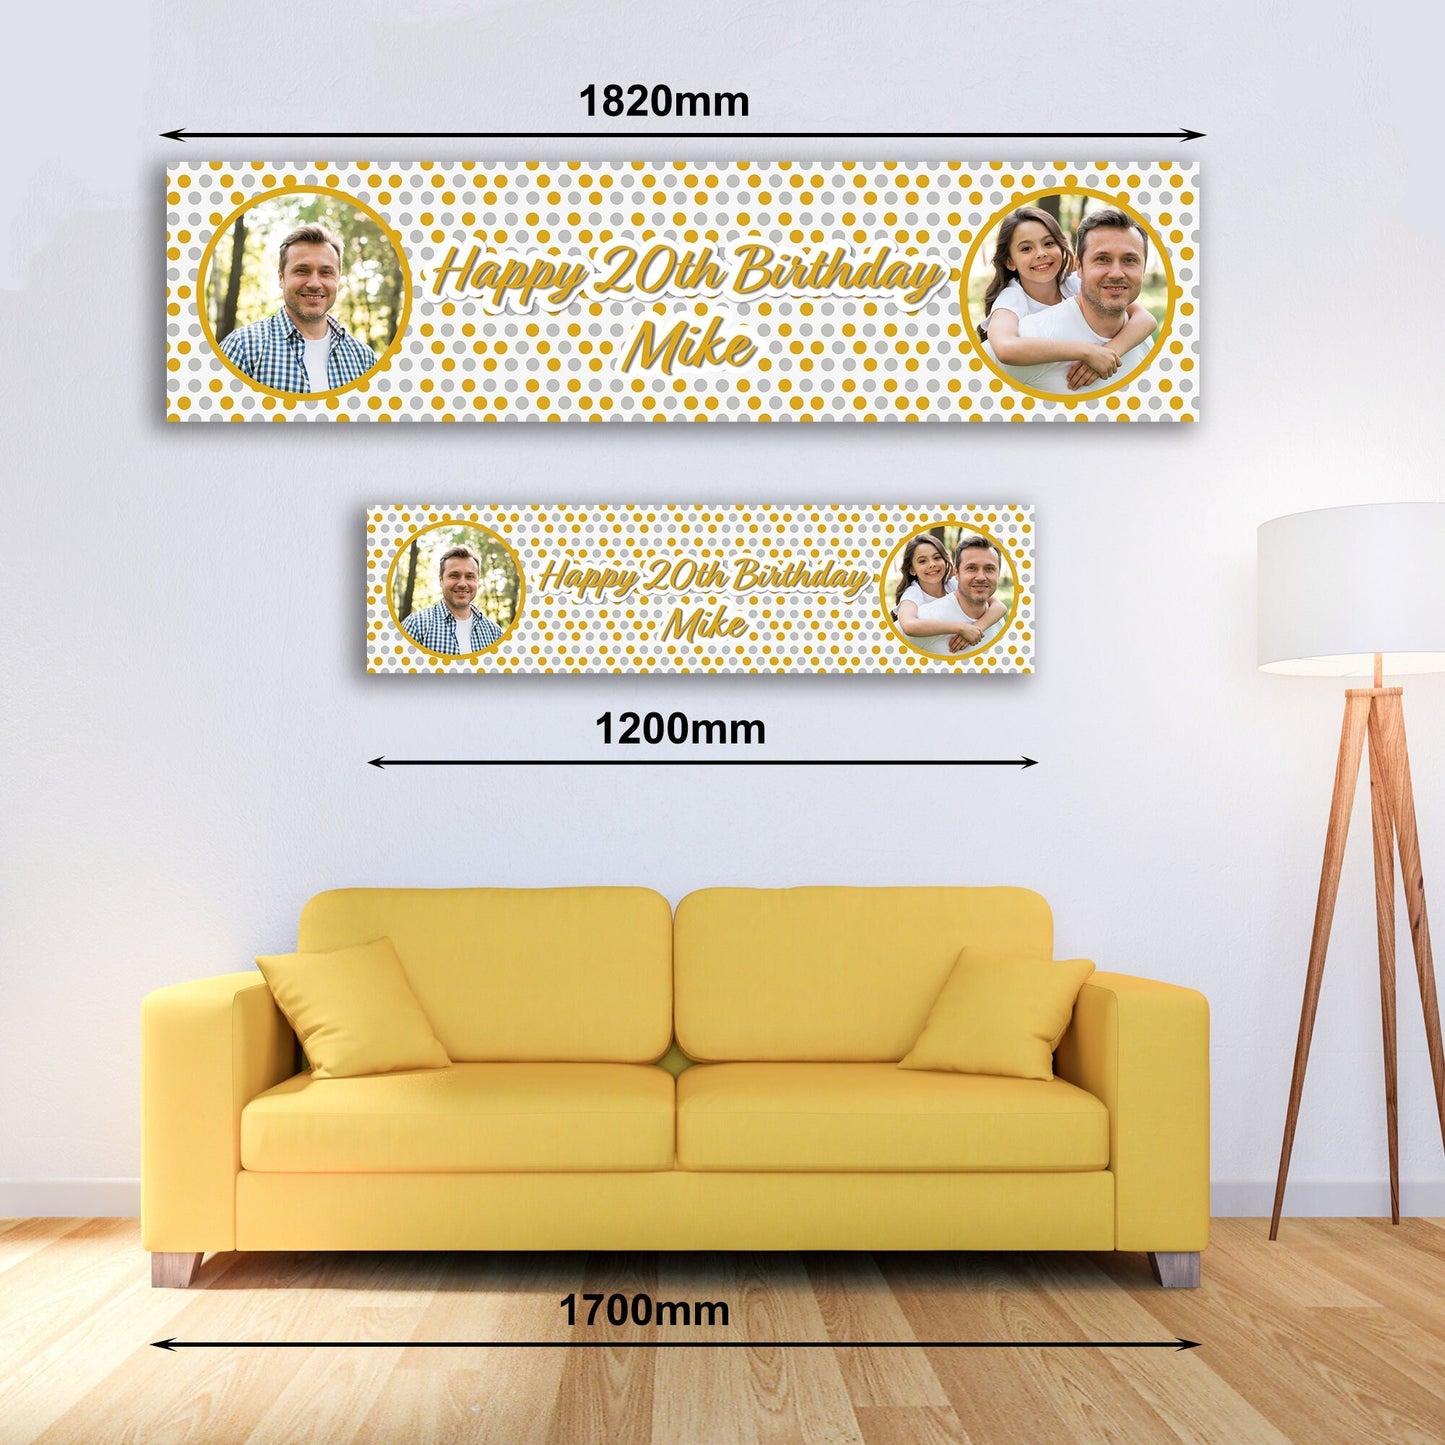 Personalised Banner - Gold Dots with Photo - Paper or Vinyl